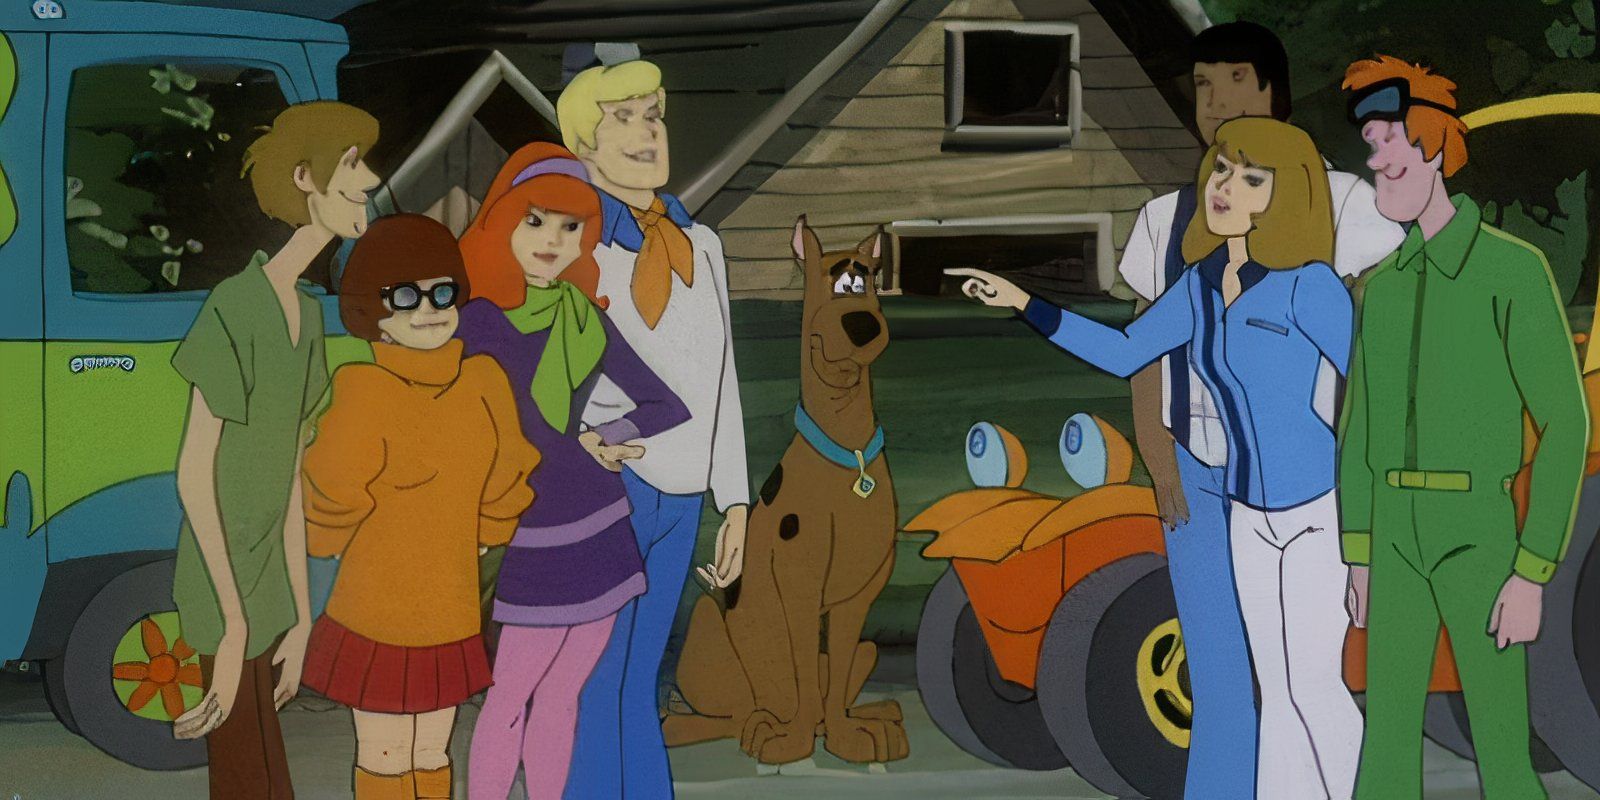 The Scooby gang meeting the Speed Buggy cast in the New Scooby Doo Movies